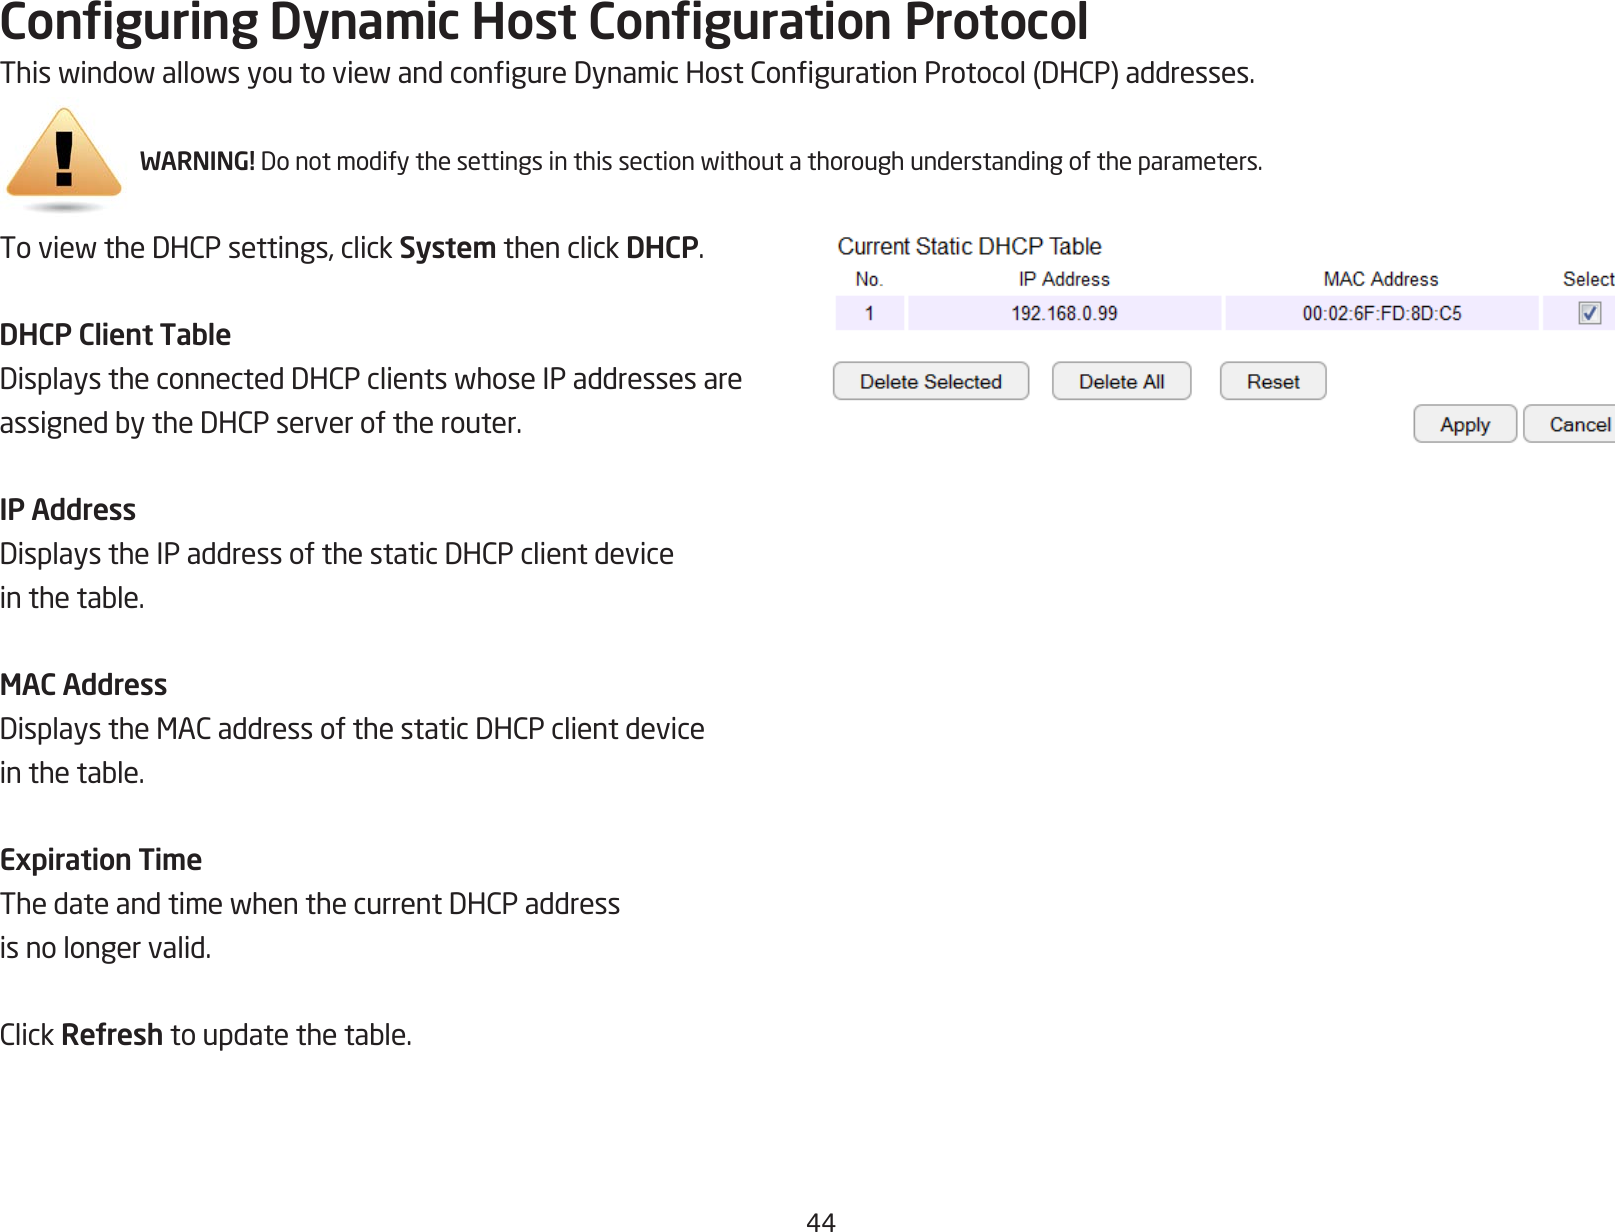 44Conguring Dynamic Host Conguration ProtocolThiswindowallowsyoutoviewandcongureDynamicHostCongurationProtocol(DHCP)addresses.WARNING! Donotmodifythesettingsinthissectionwithoutathoroughunderstandingoftheparameters.ToviewtheDHCPsettings,clickSystem then click DHCP.DHCP Client TableDisplaystheconnectedDHCPclientswhoseIPaddressesareassignedbytheDHCPserveroftherouter.IP AddressDisplaystheIPaddressofthestaticDHCPclientdeviceinthetable.MAC AddressDisplaystheMACaddressofthestaticDHCPclientdeviceinthetable.Expiration TimeThedateandtimewhenthecurrentDHCPaddressis no longer valid.ClickRefreshtoupdatethetable.